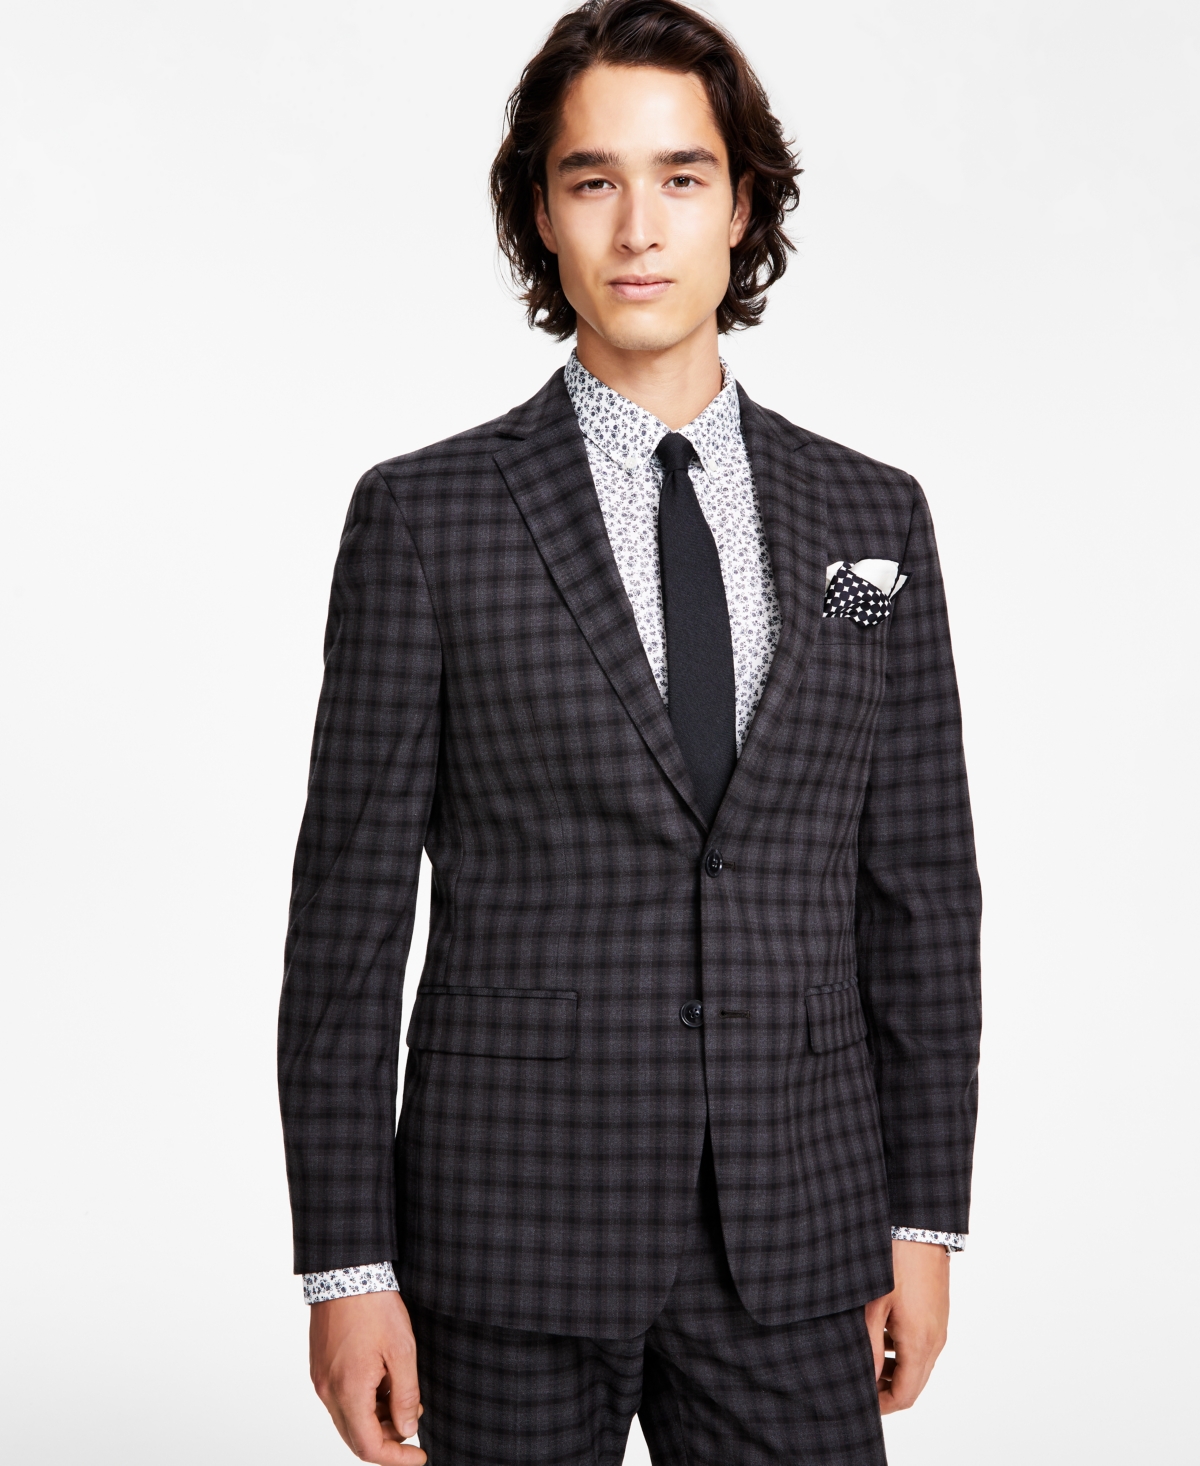 Men's Slim-Fit Check Suit Jacket, Created for Macy's - Brown Check